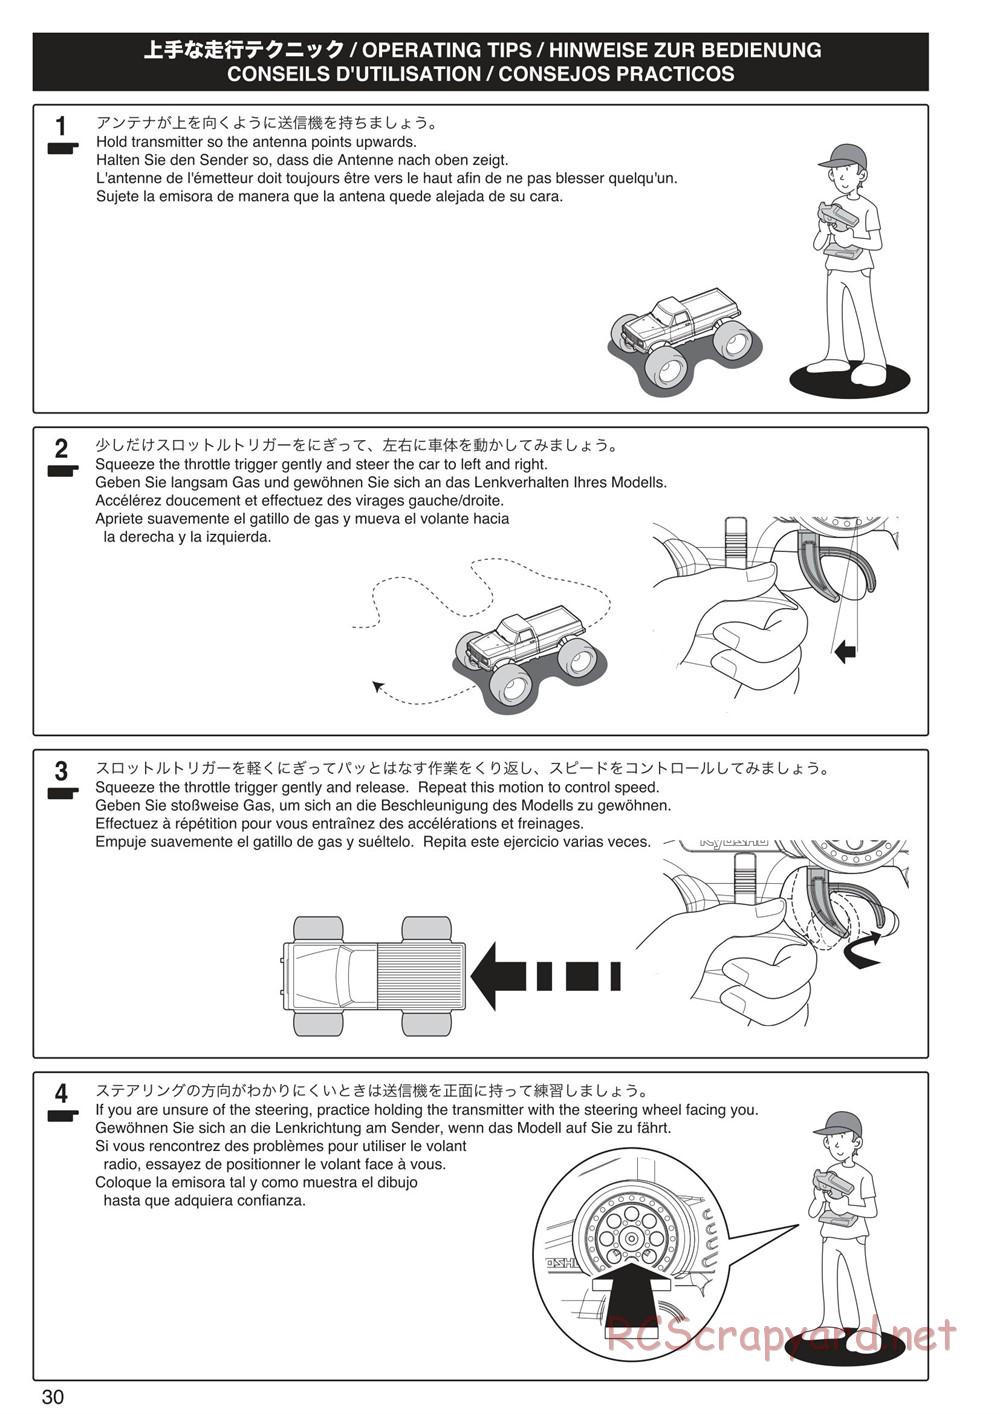 Kyosho - Mad Crusher VE - Manual - Page 30